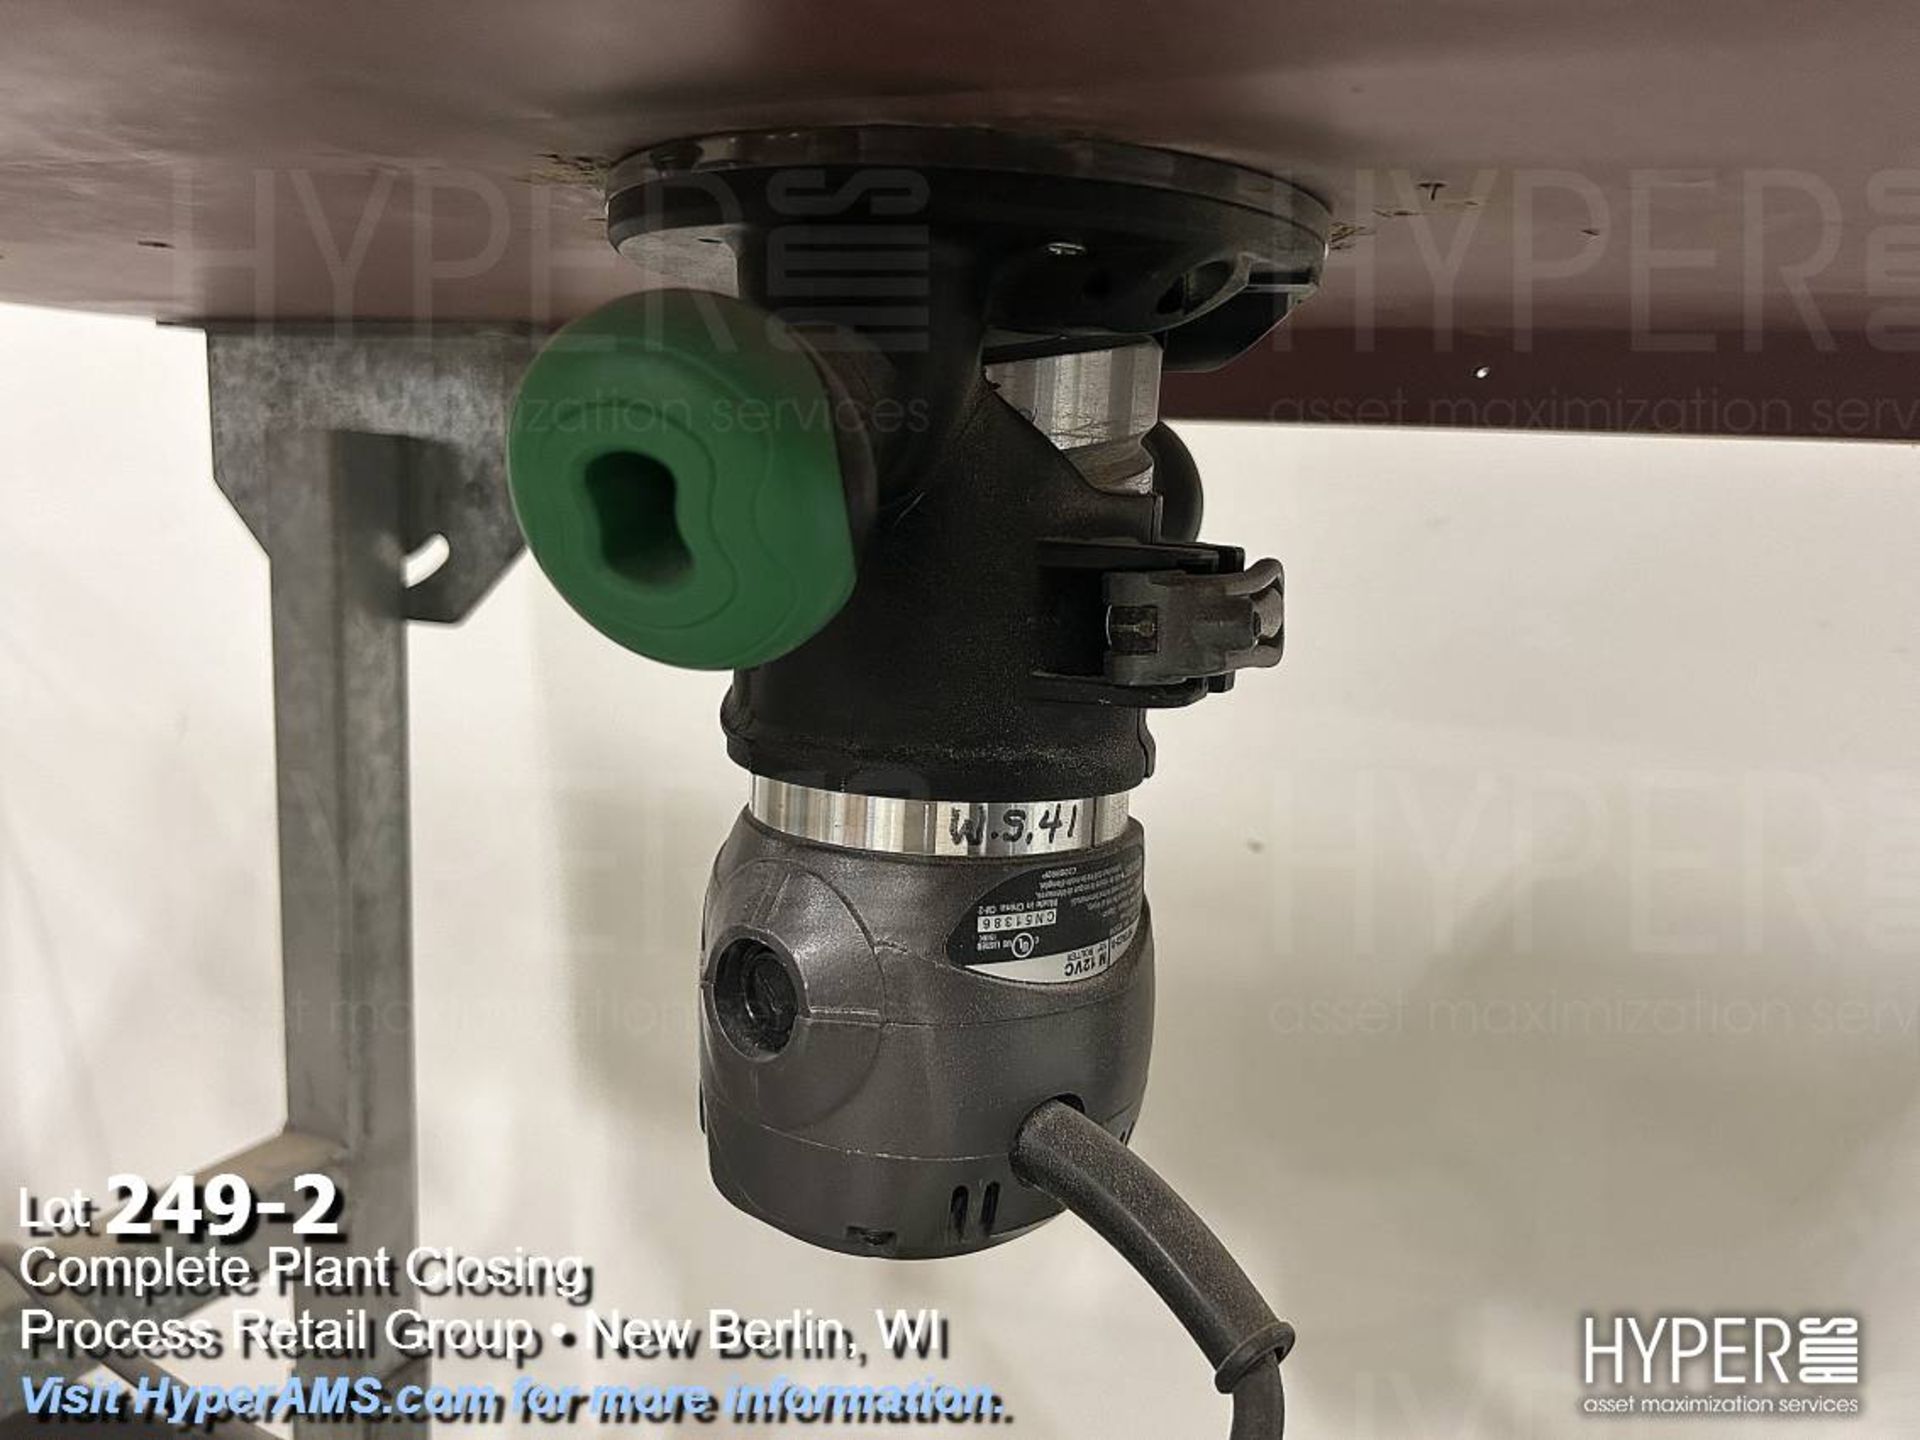 Hitachi router table - Image 2 of 2